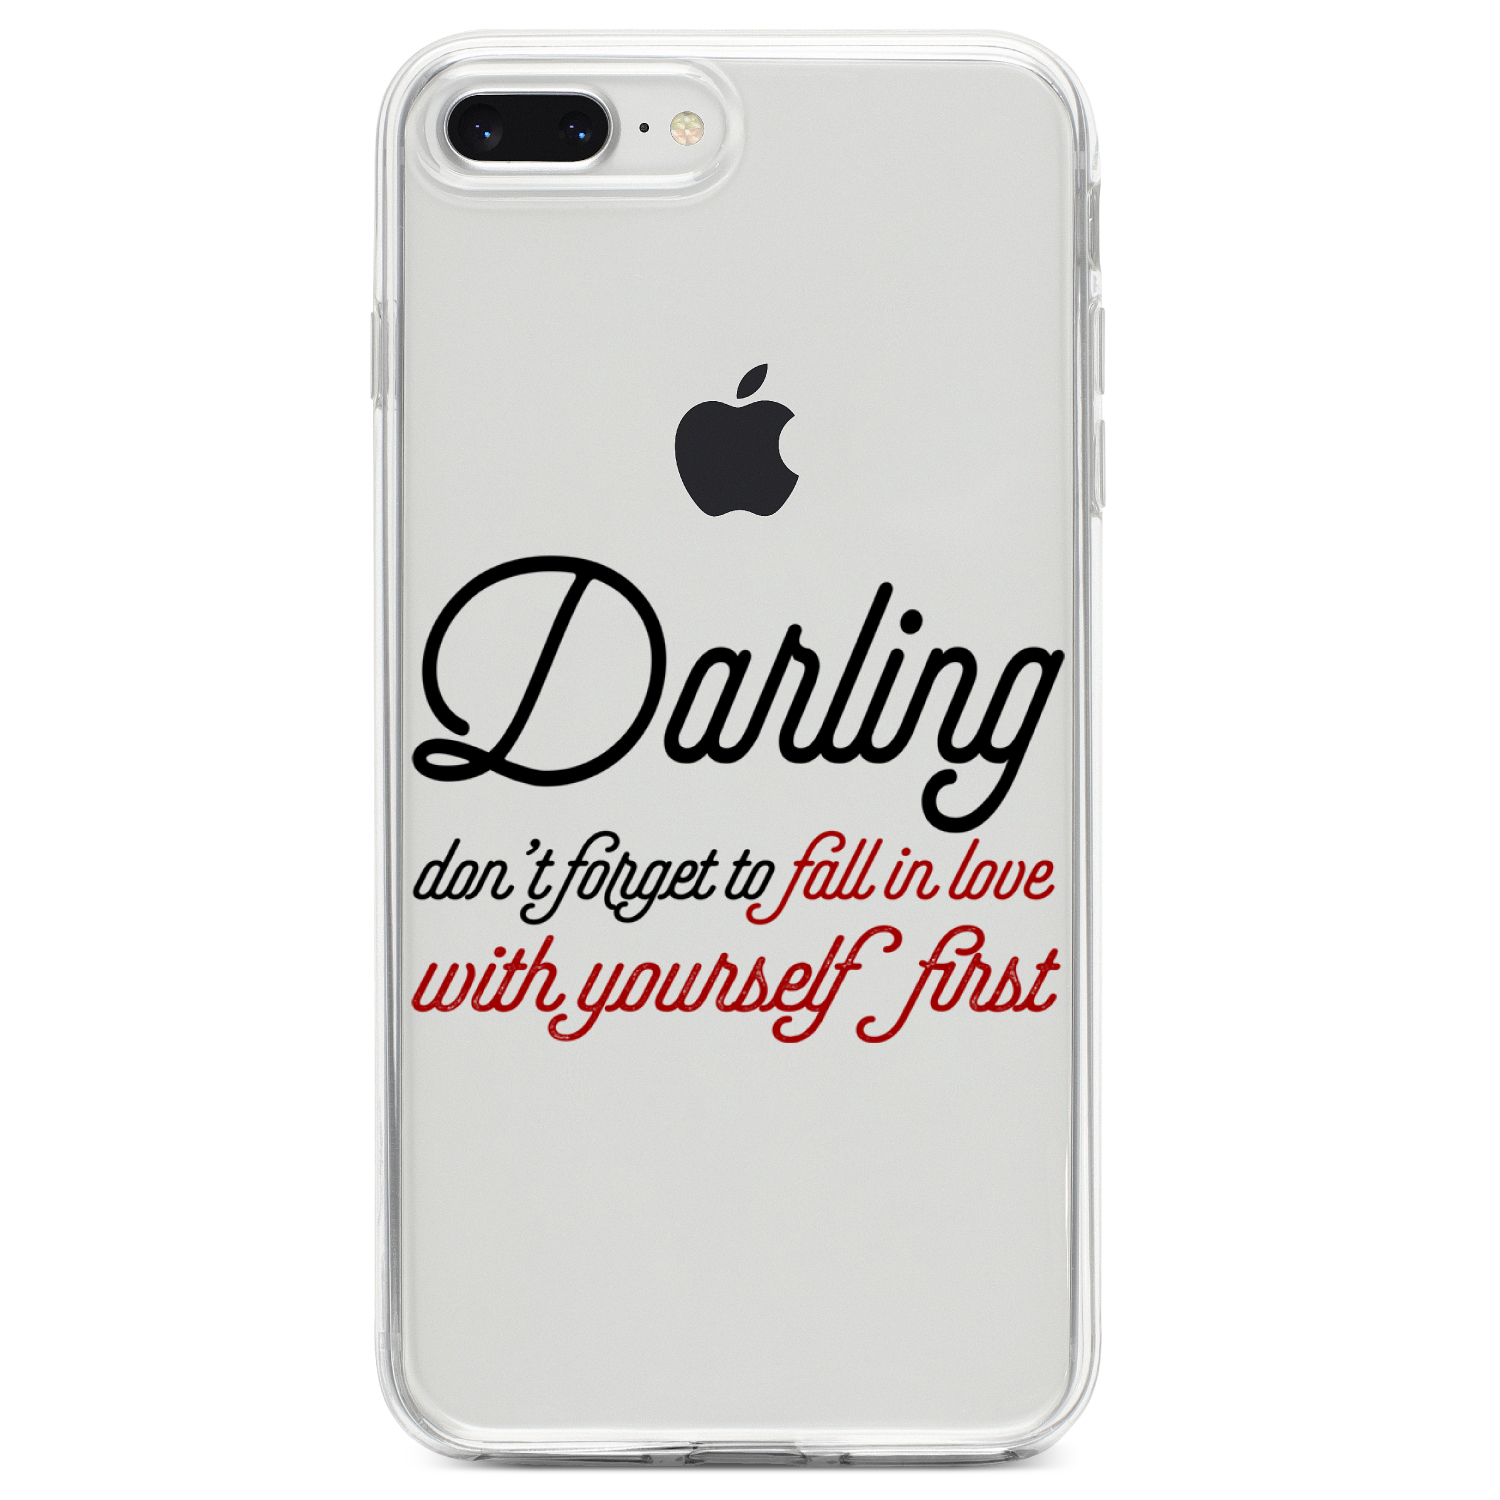 DistinctInk Clear Shockproof Hybrid Case for iPhone 7 PLUS / 8 PLUS (5.5" Screen) TPU Bumper Acrylic Back Tempered Glass Screen Protector - Darling Don't Forget to Fall In Love with Yourself - image 1 of 5